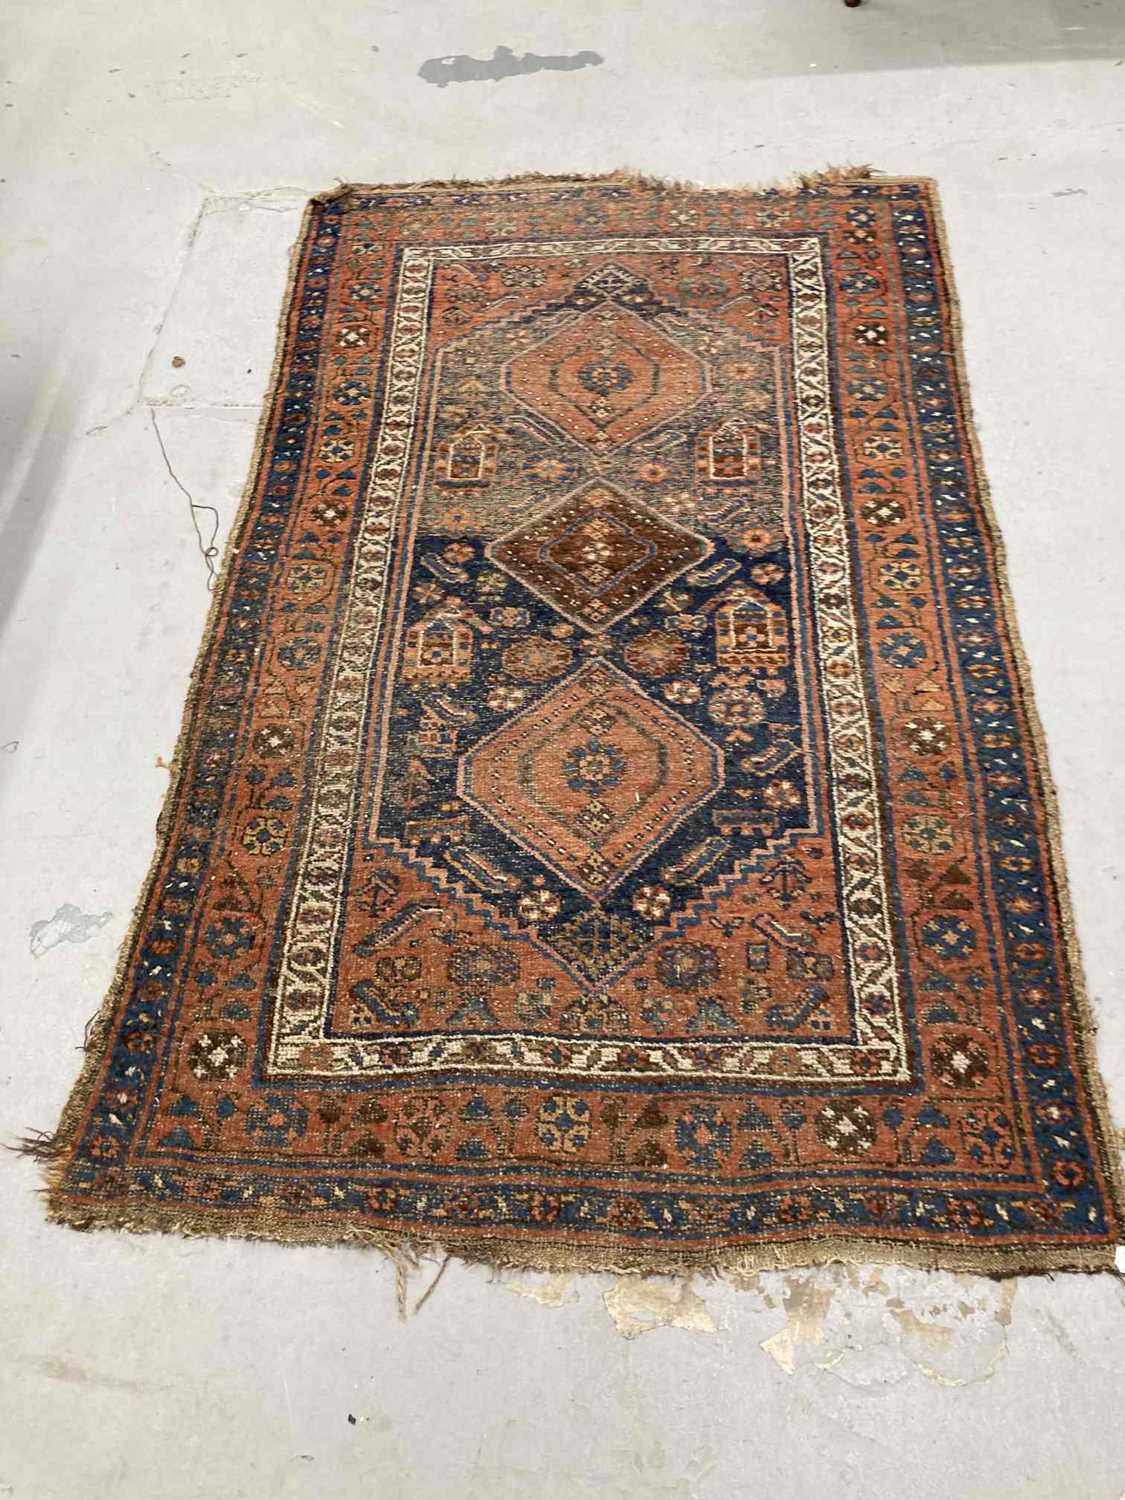 Rugs & Carpets: - Image 7 of 8